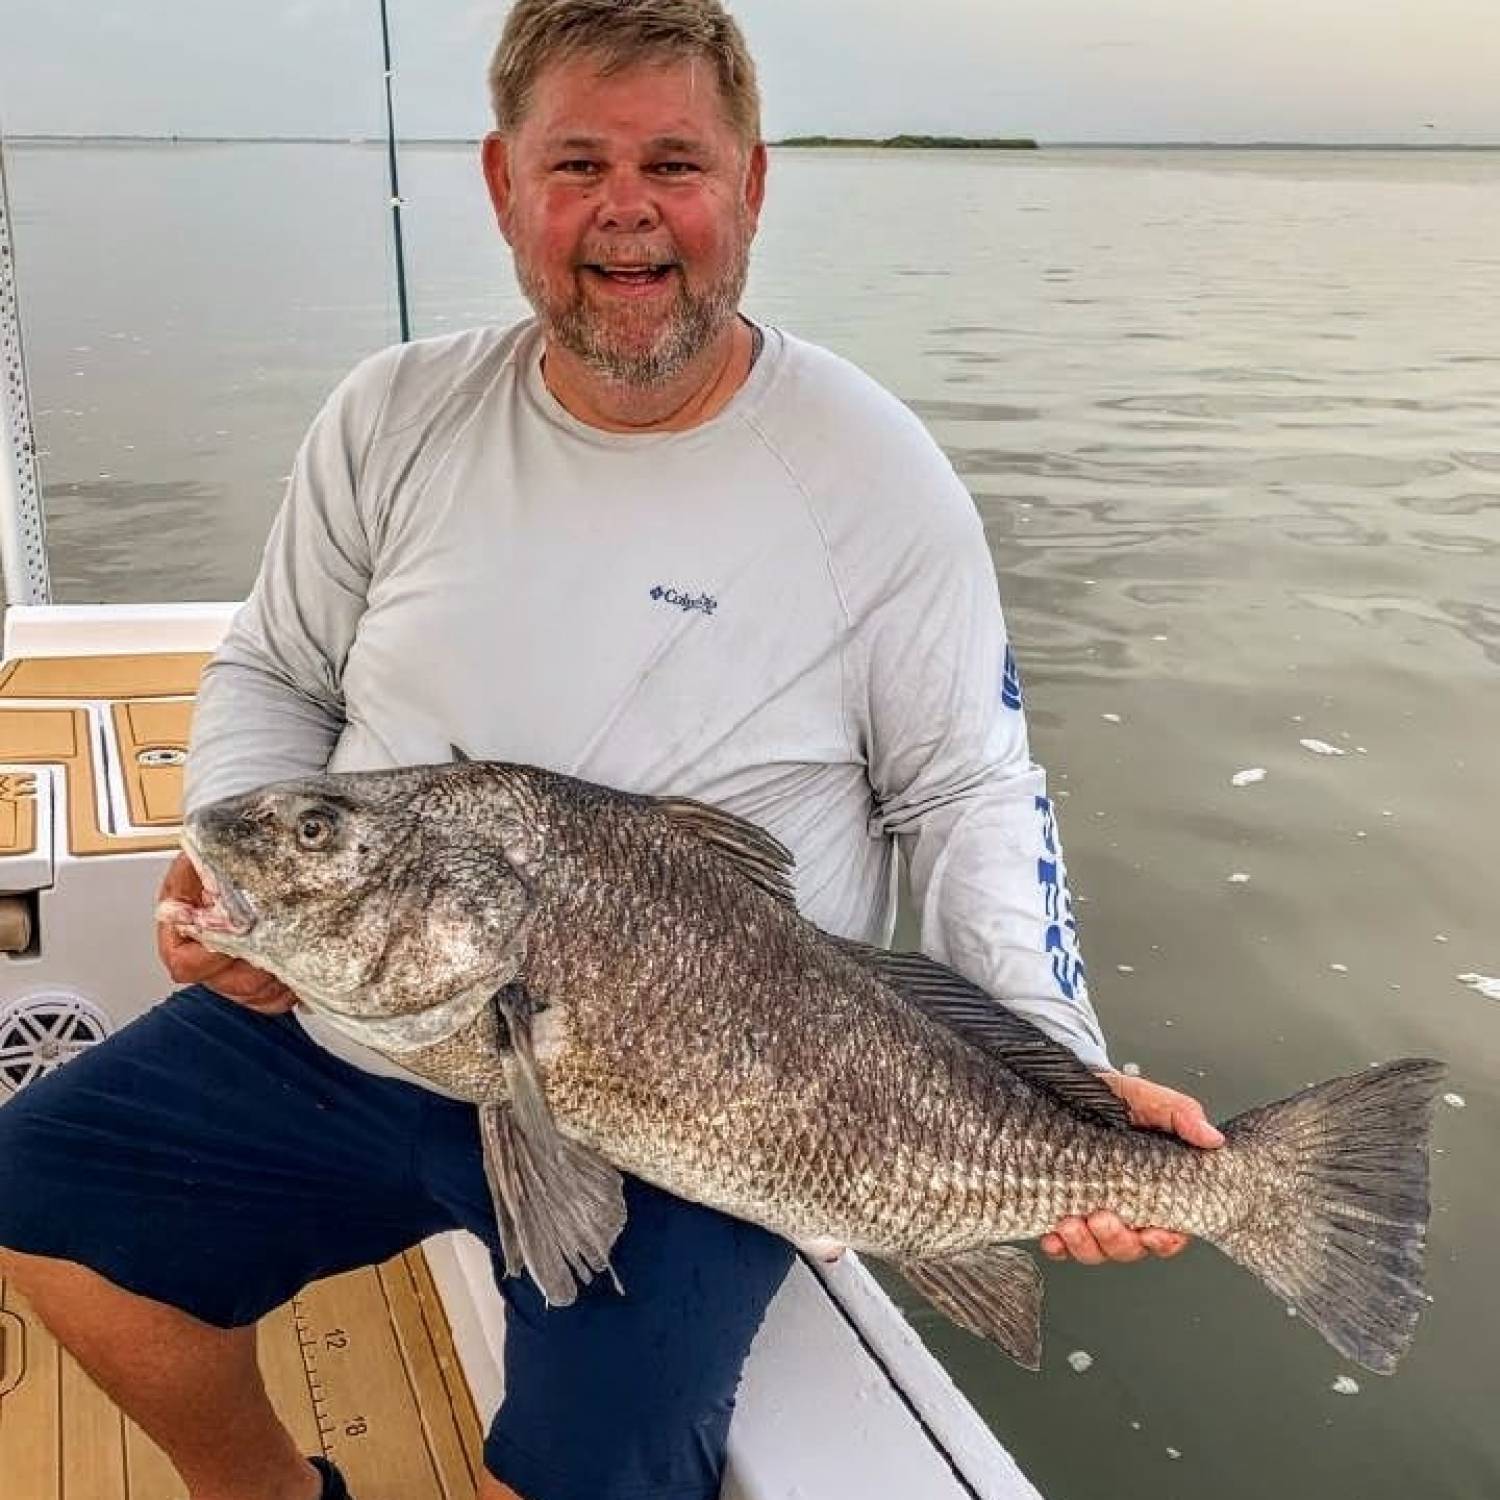 Title: Black drum - On board their Sportsman Masters 227 Bay Boat - Location: Indian River Lagoon. Participating in the Photo Contest #SportsmanSeptember2021